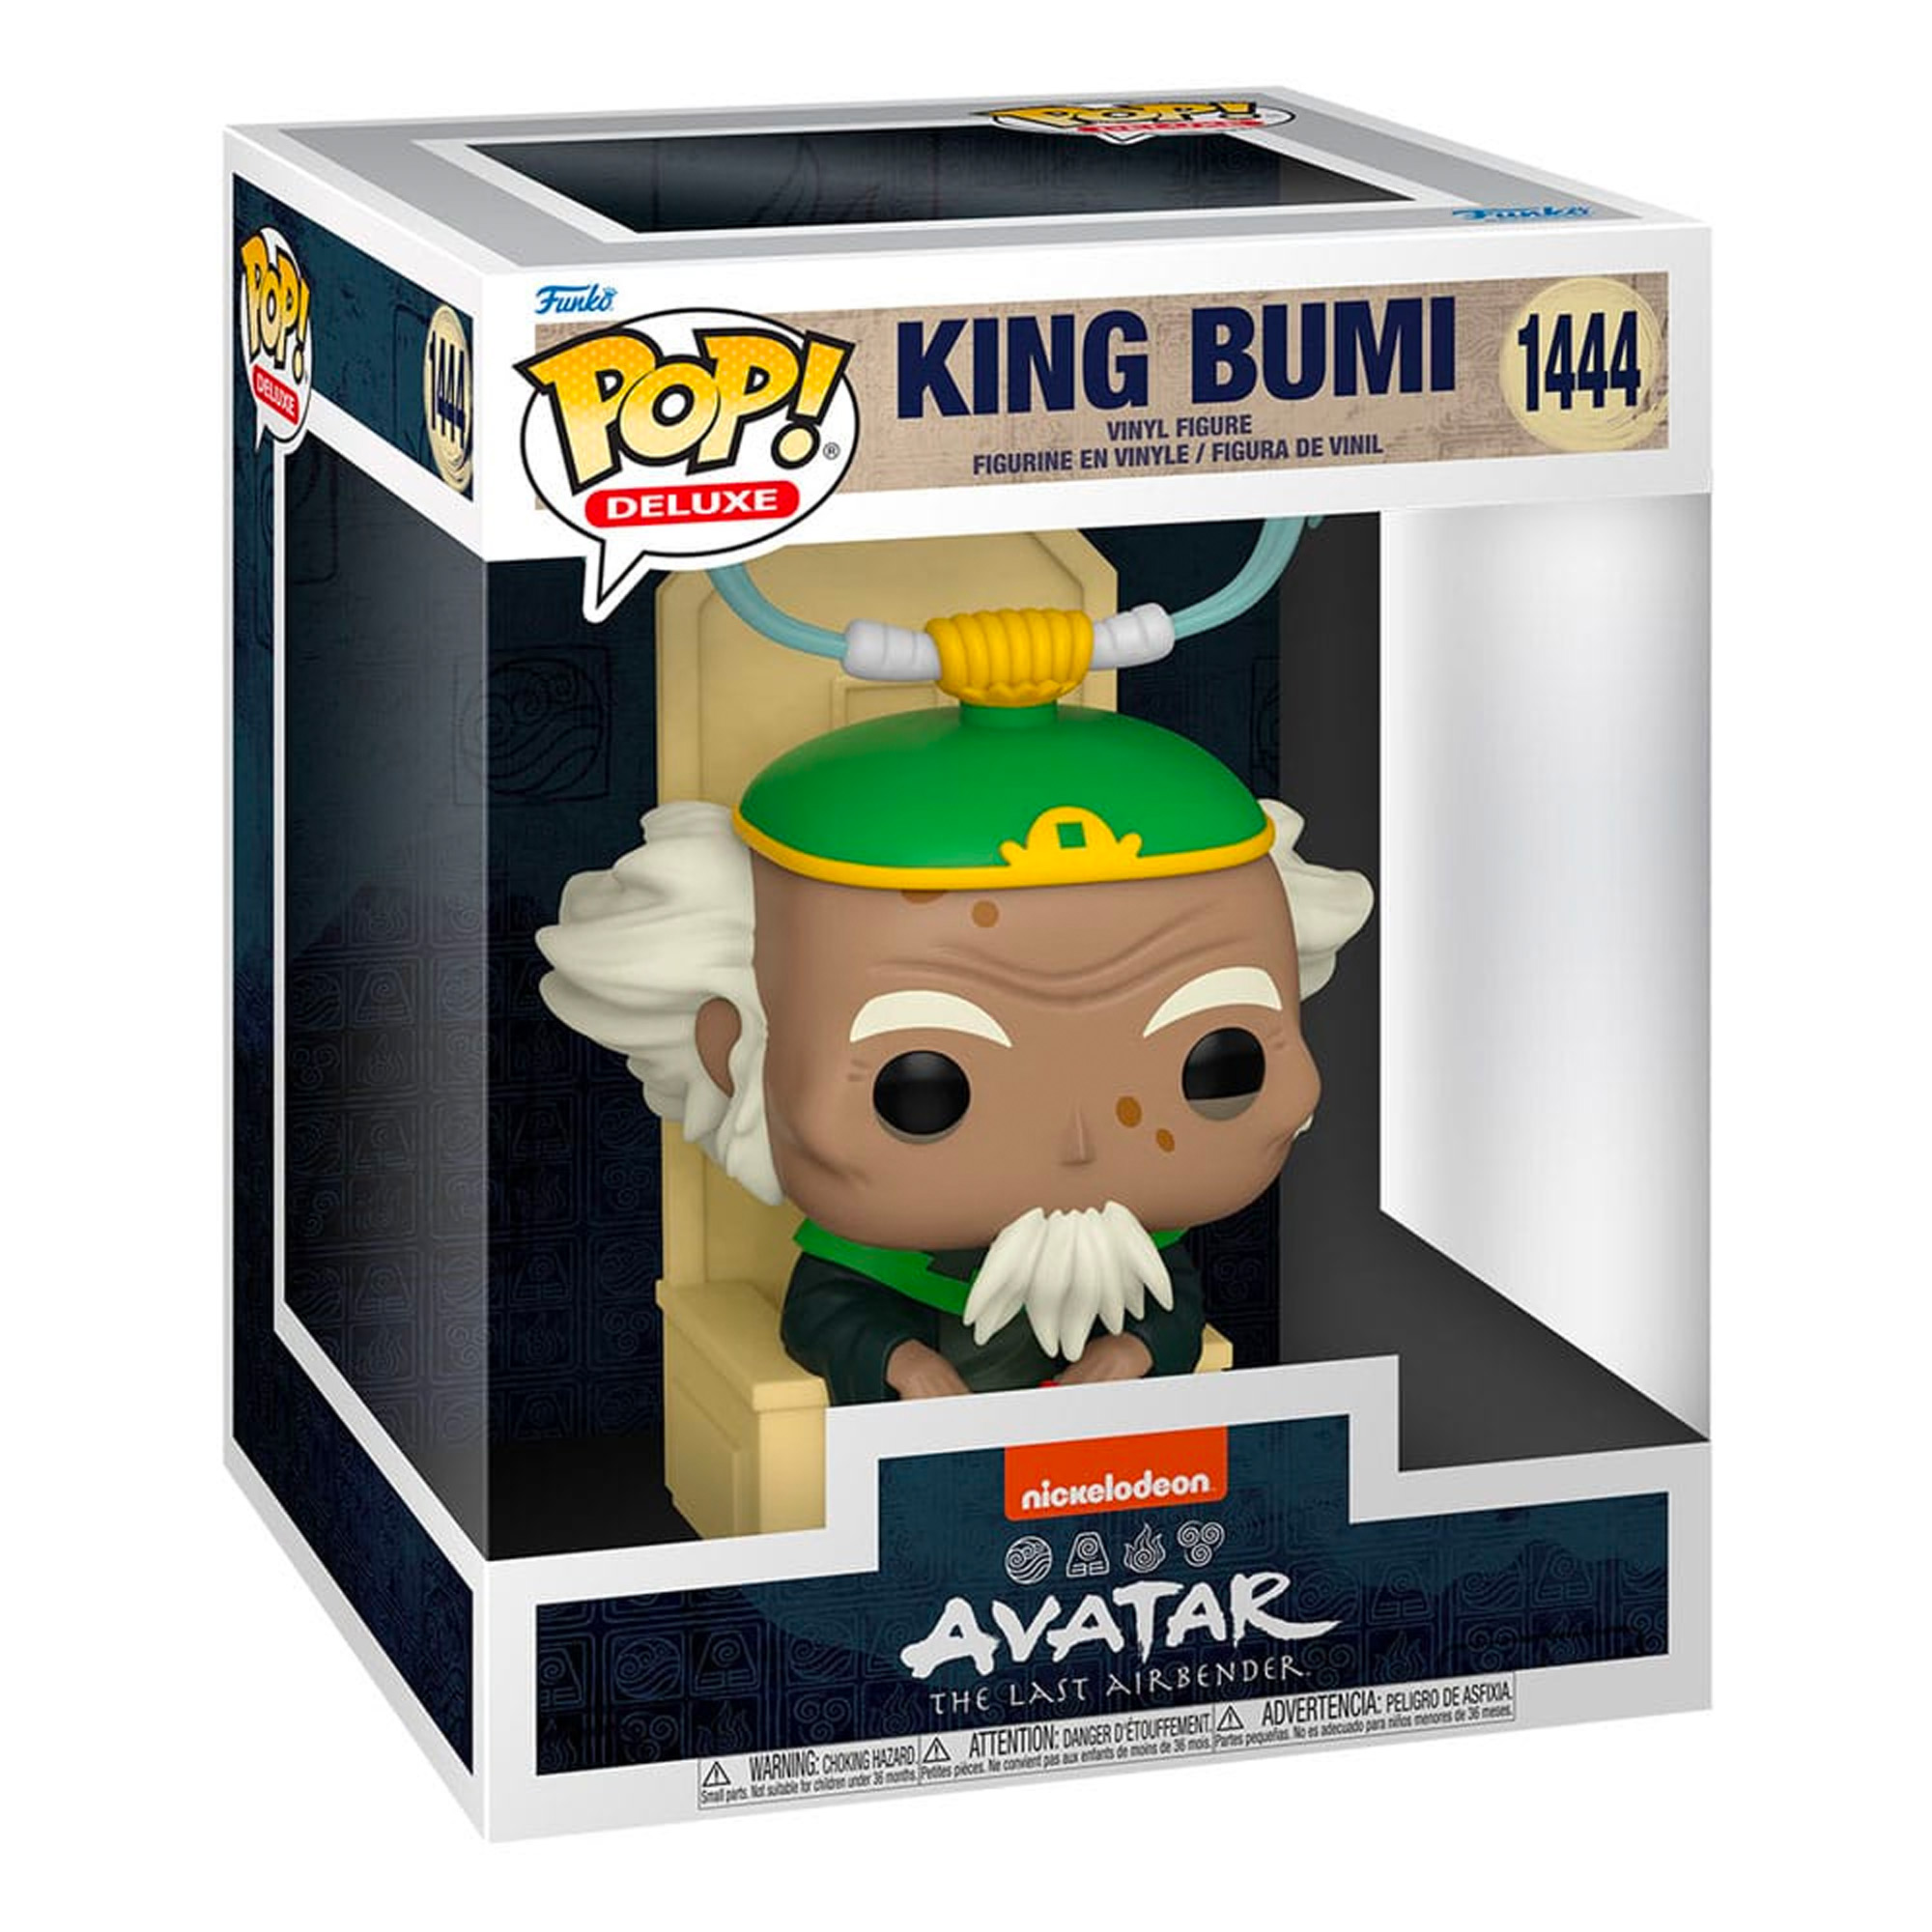 Funko POP! King Bumi (Deluxe) - Avatar: The Last Airbender